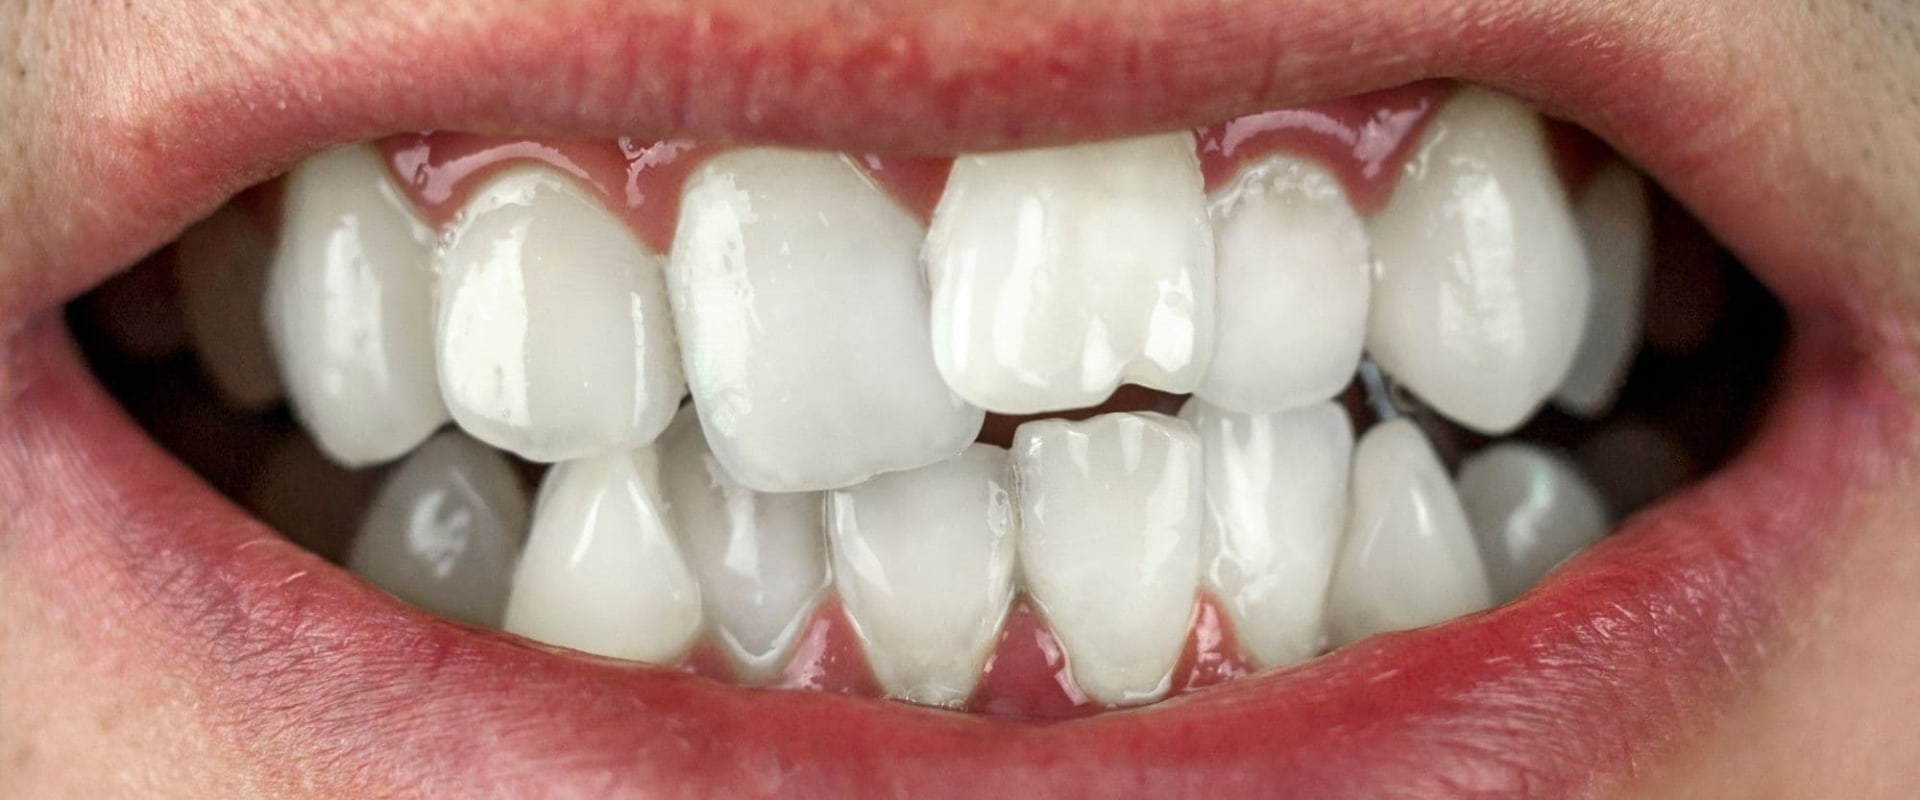 Can a Smile Makeover Fix Crooked Teeth?